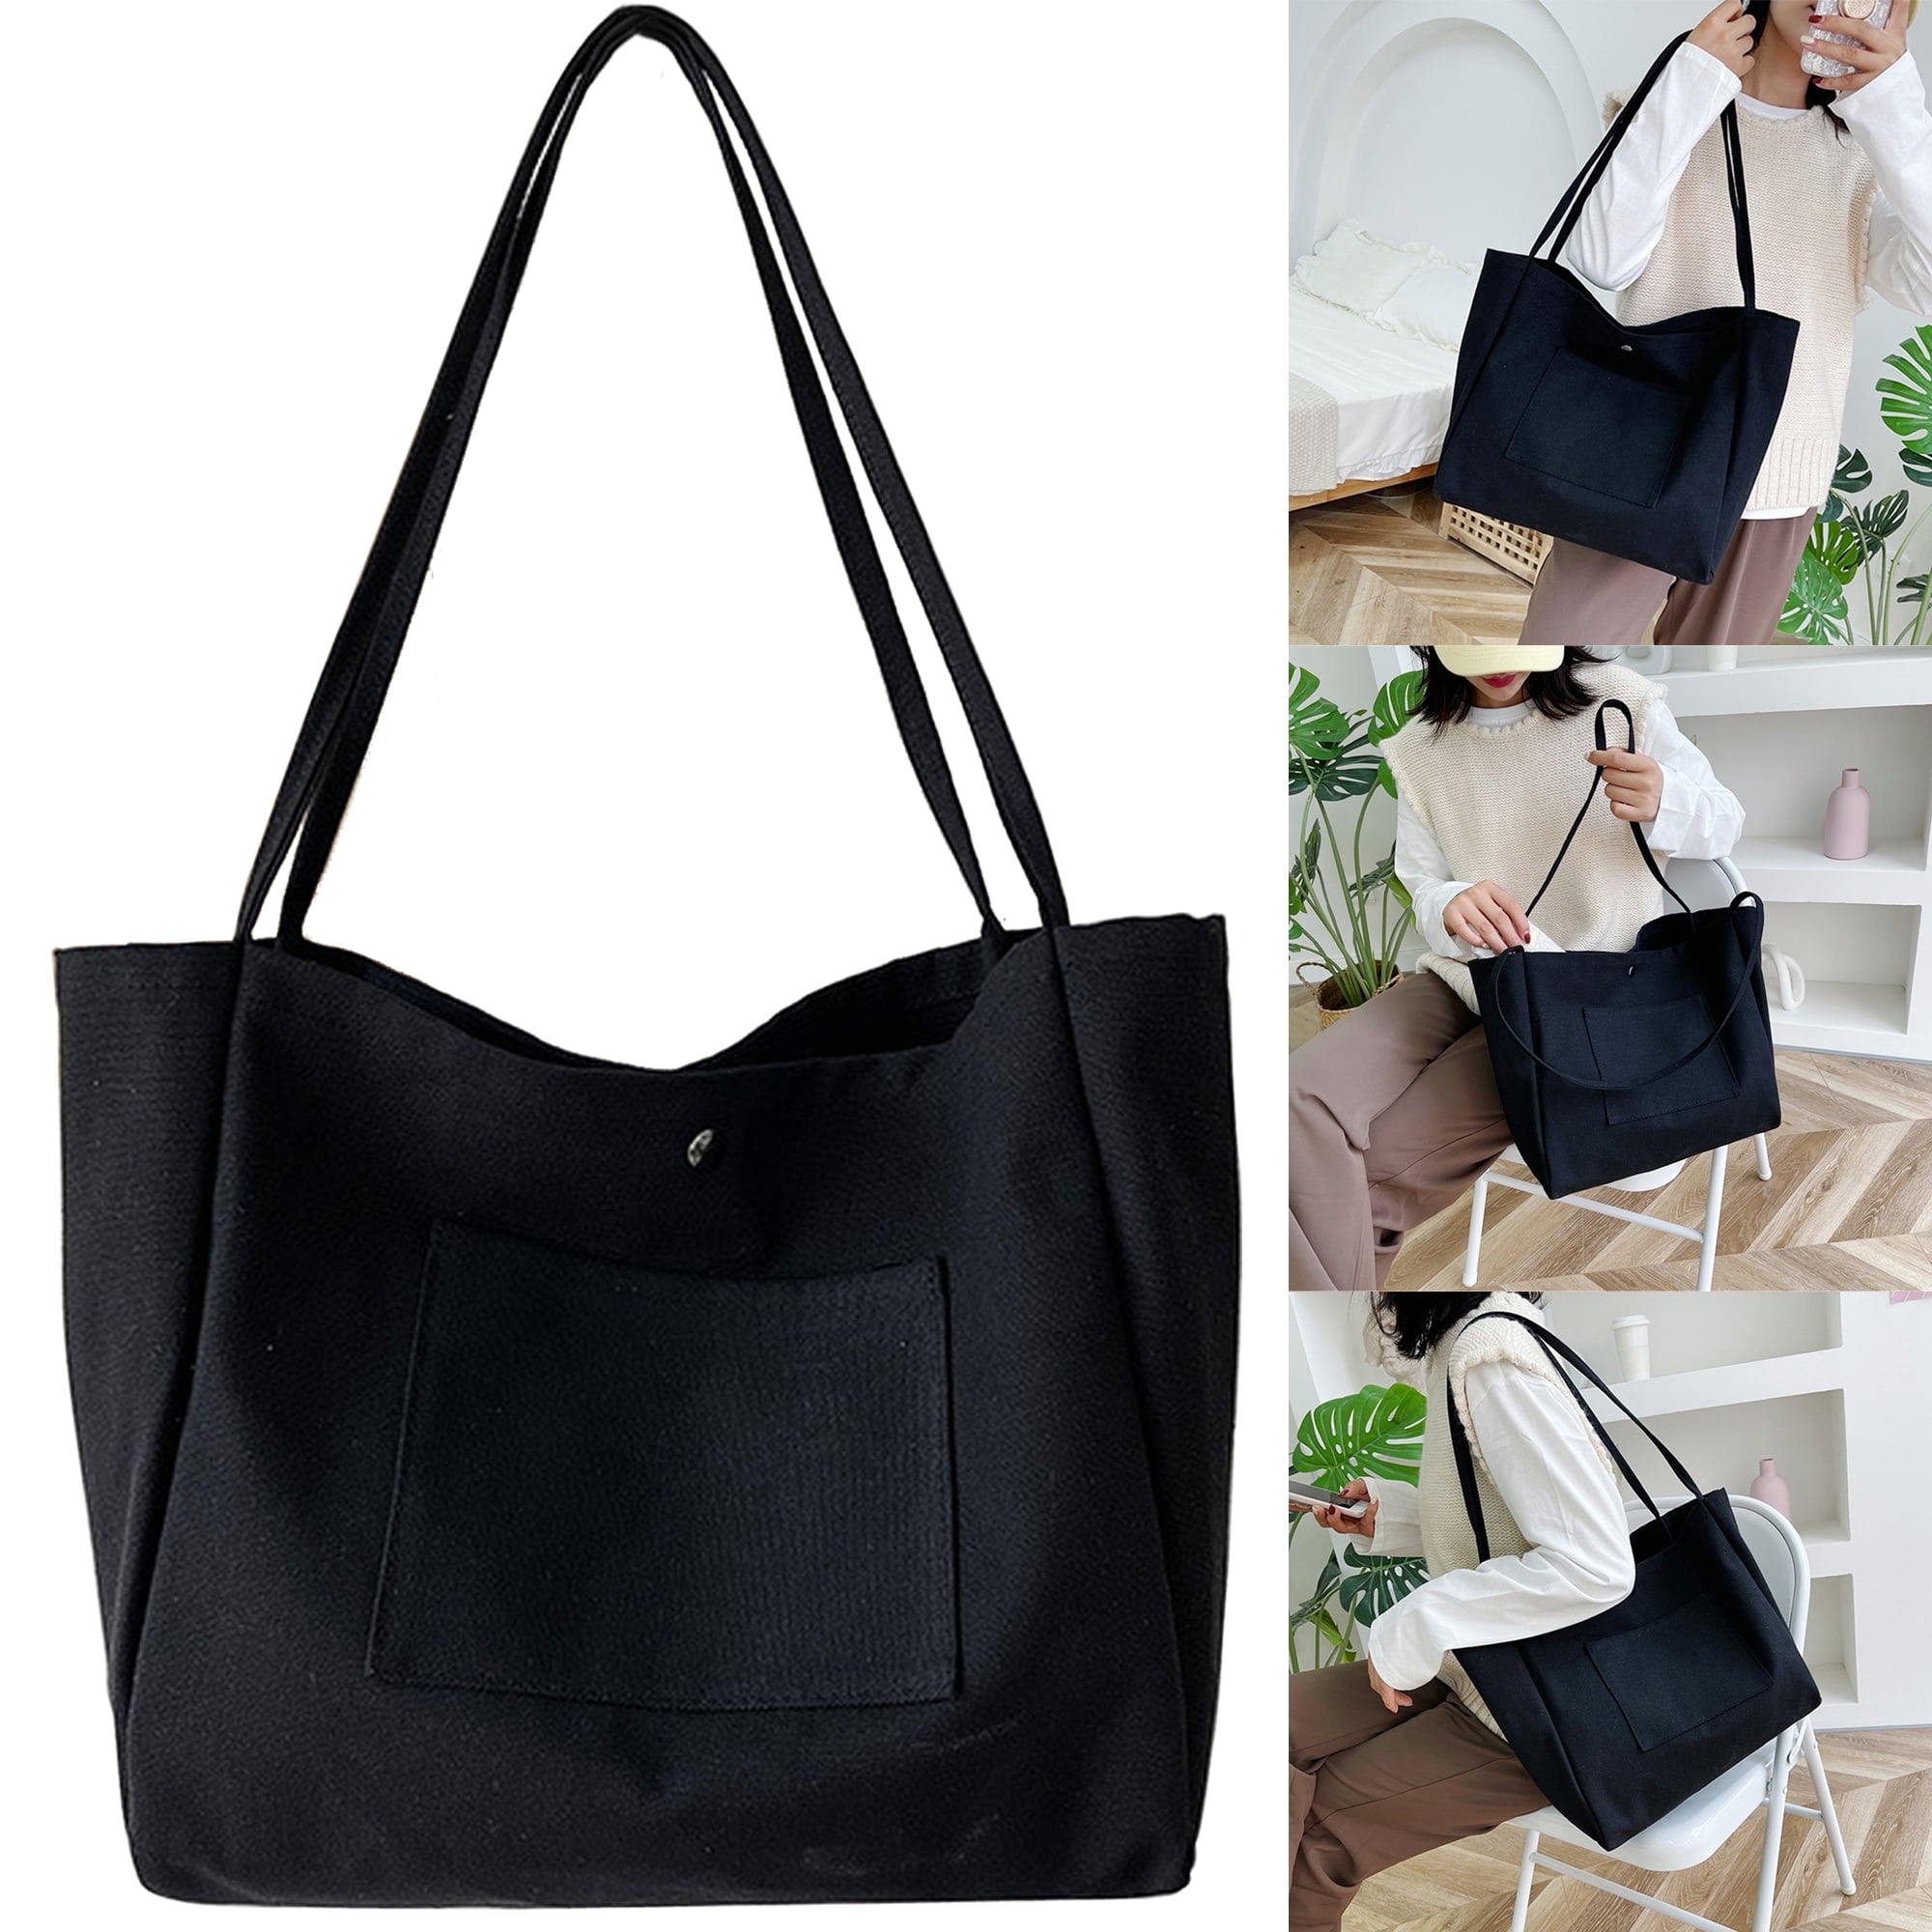  Woven Leather Handbags, Hobo Tote Bags with Zipper for Women,  Fashion Large Capacity Shoulder Travel Bag Handbag Purse Bag : Clothing,  Shoes & Jewelry